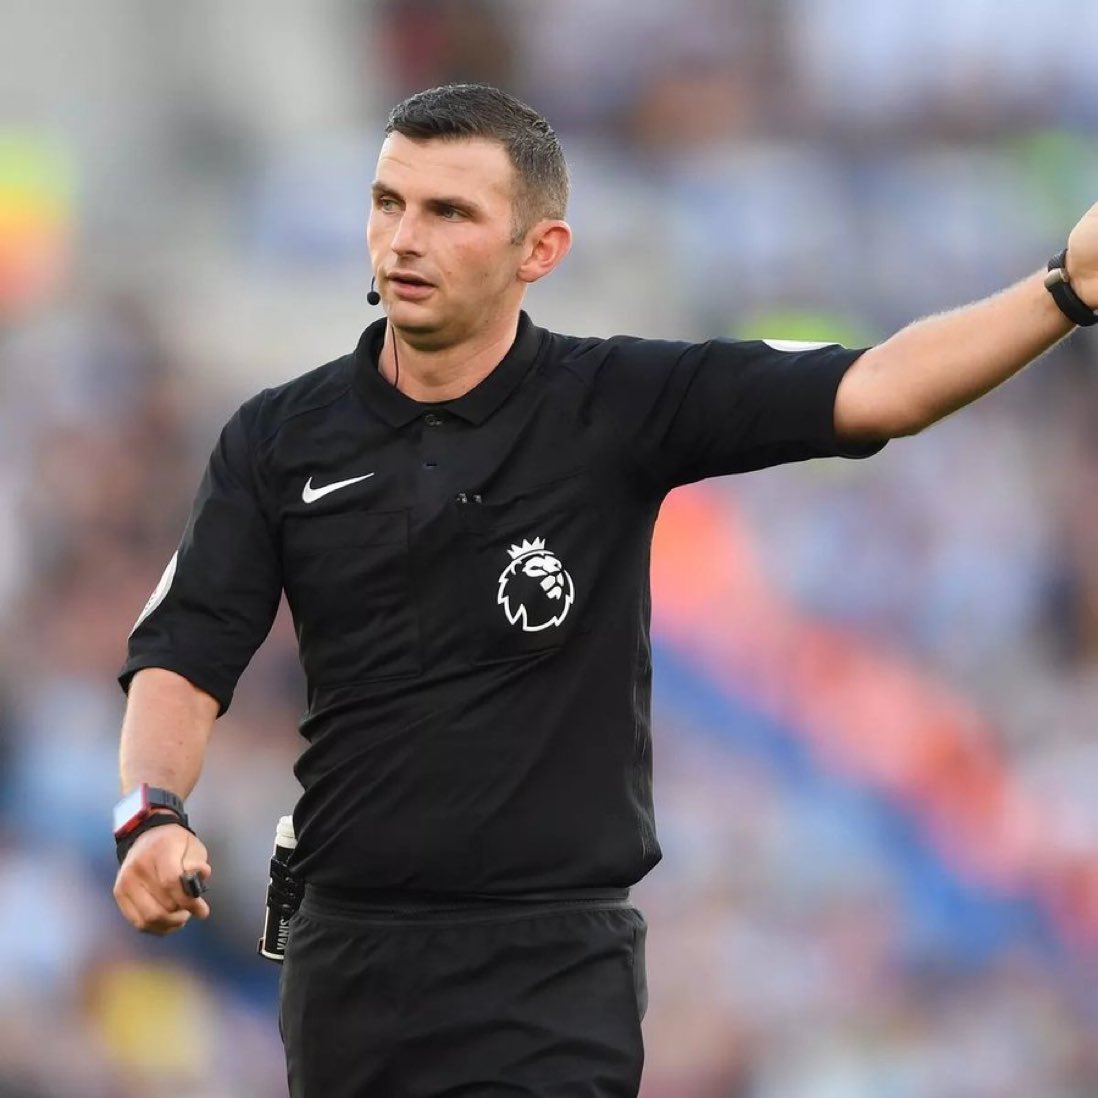 Michael Oliver will referee Arsenal’s game against Tottenham on Sunday, with Liverpool fan Jarred Gillett on VAR. [@premierleague]